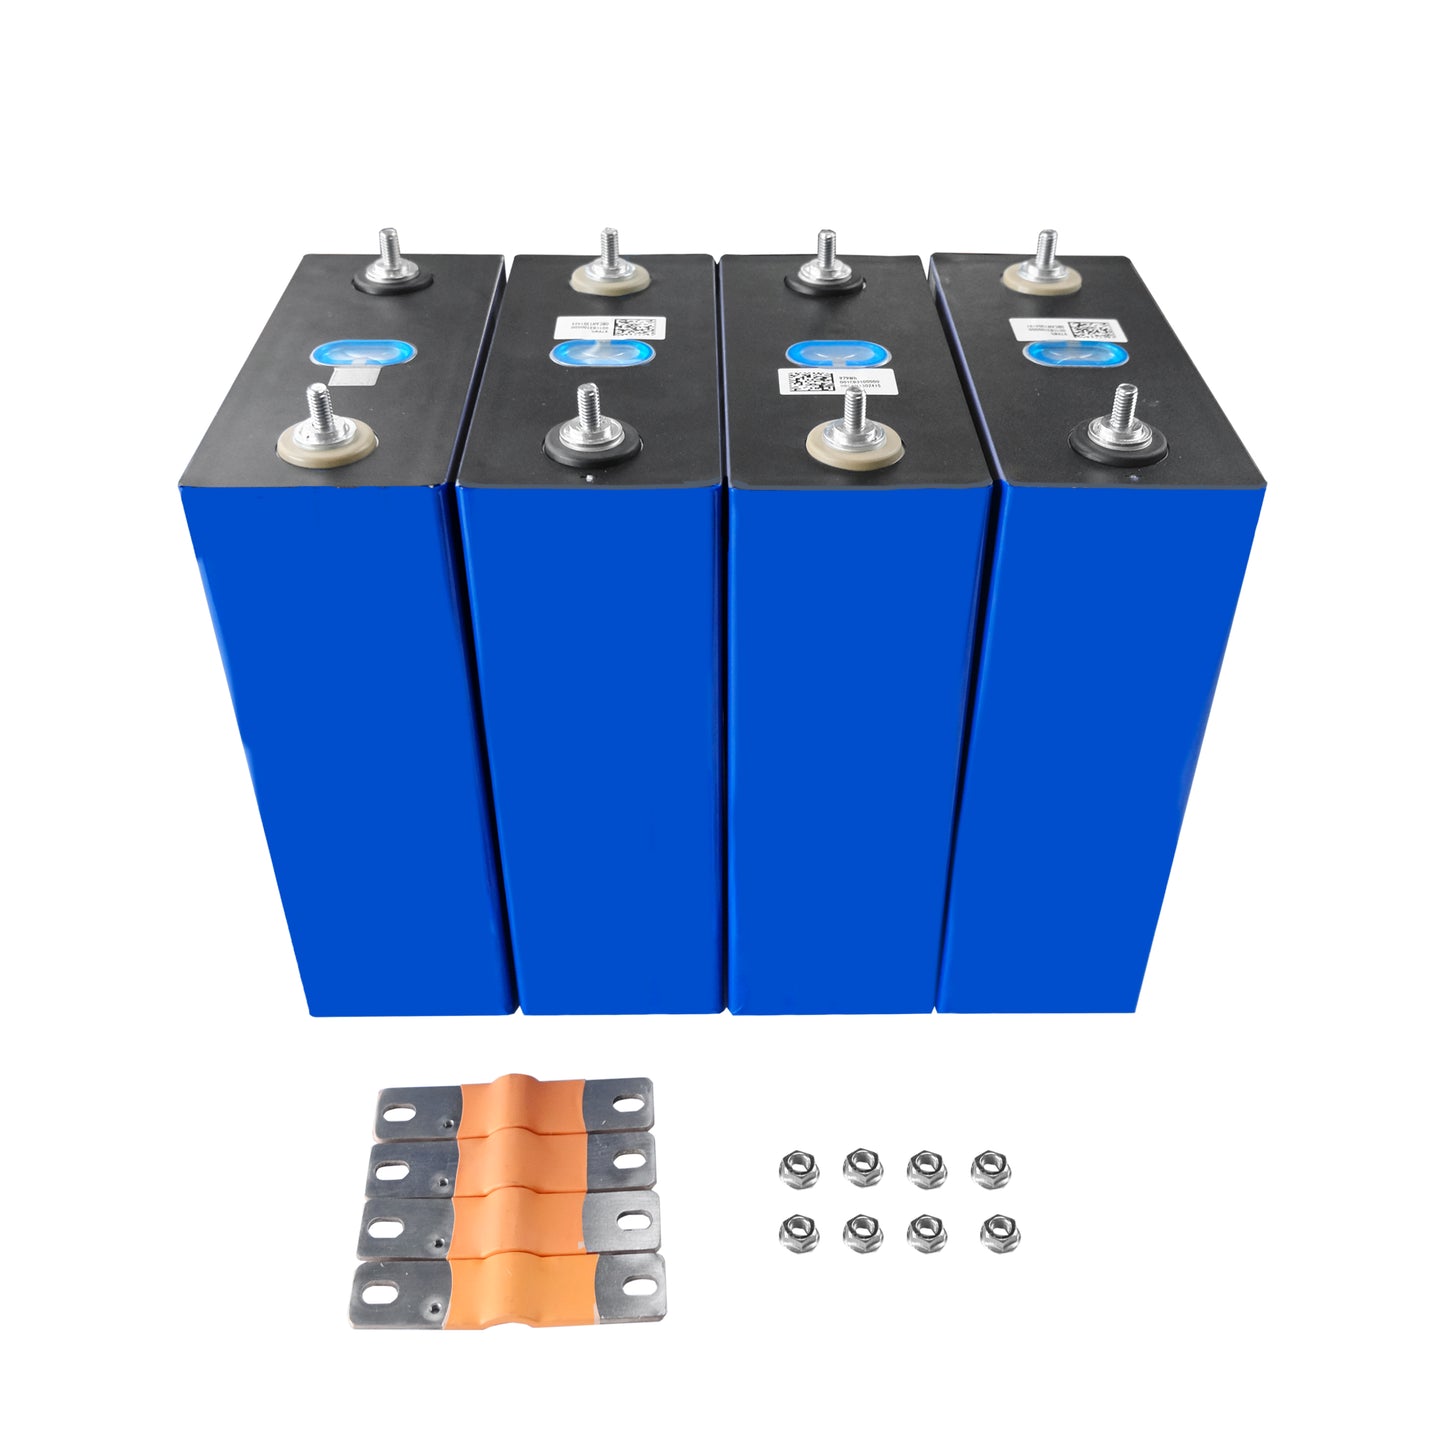 4PCS 3.2V CATL 320Ah Grade A Lifepo4 Battery Cells Rechargeable for EV Solar China Shipping